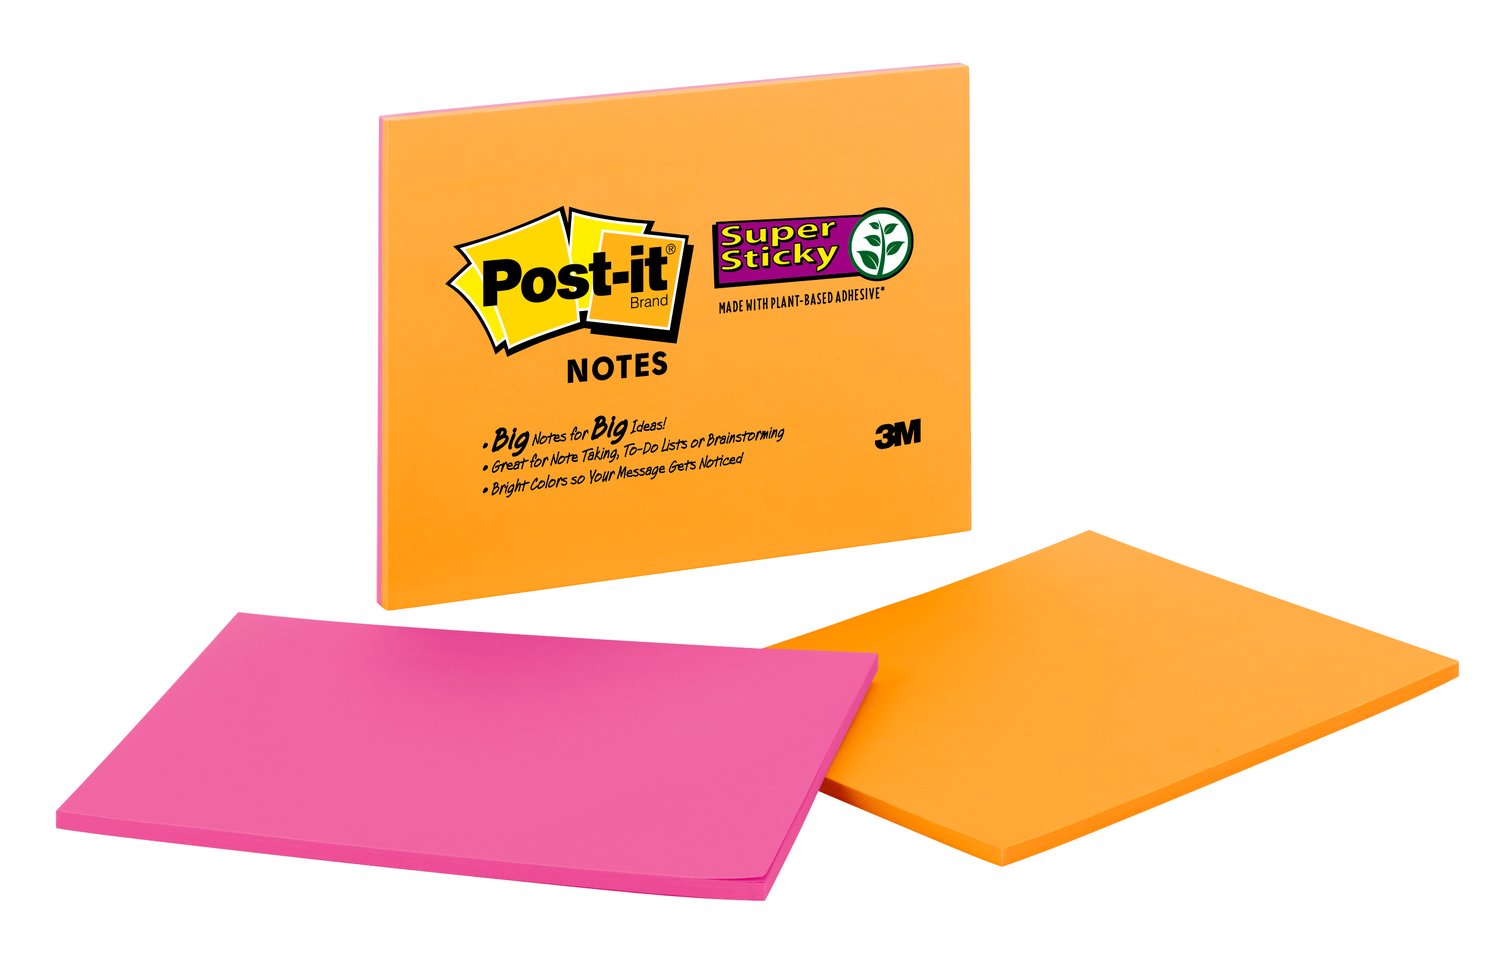 7010332891 - Post-it Super Sticky Notes 6845-SSP-2PK, 8 in x 6 in (203 mm x 152 mm)
Rio de Janeiro Collection, Lined, 2 Pads/Pack